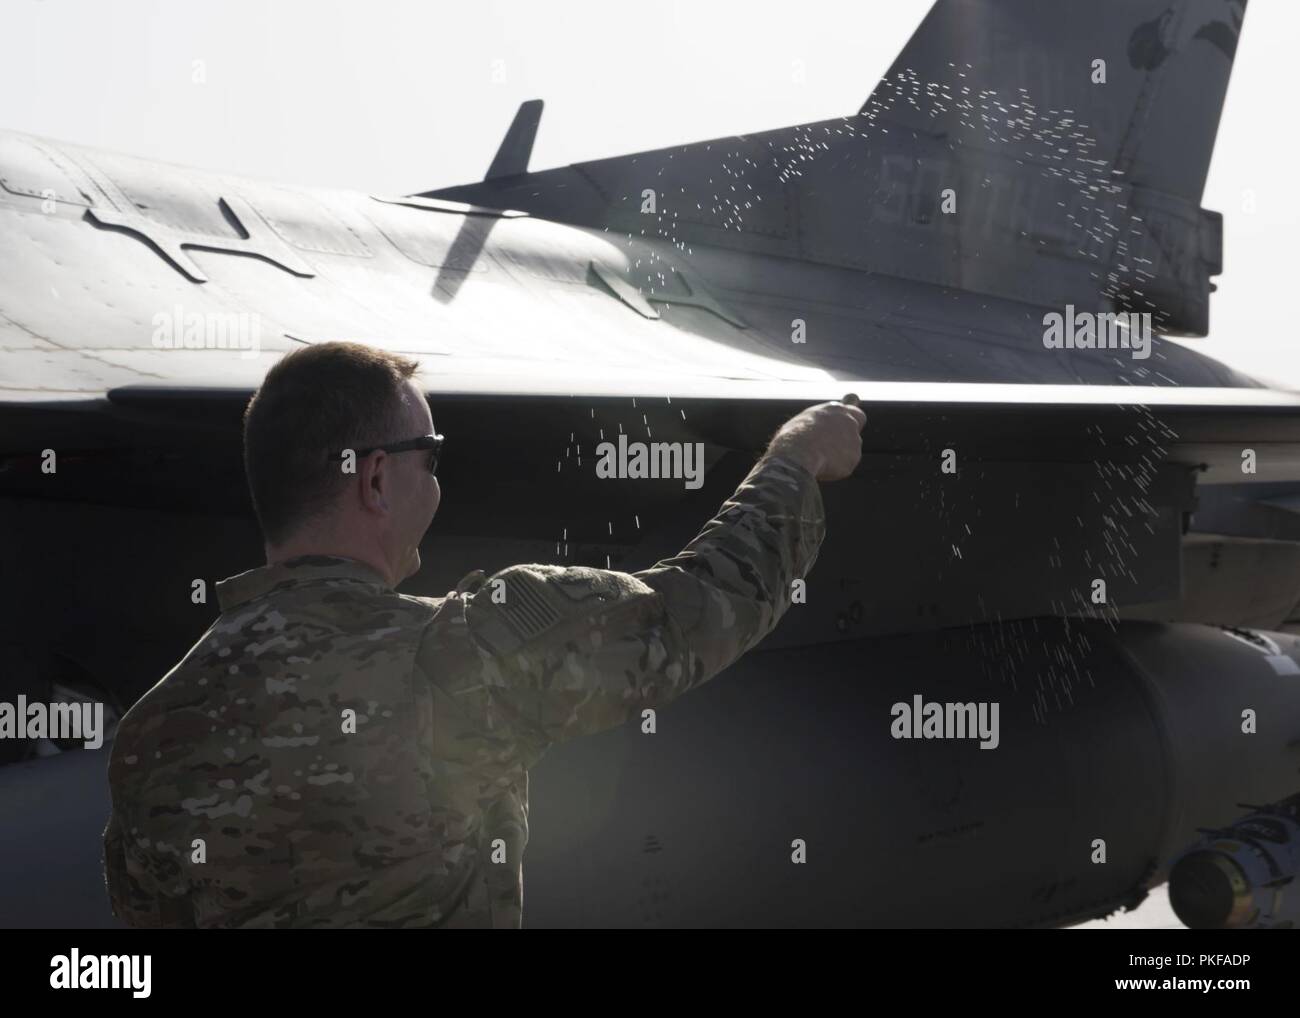 U.S. Air Force Capt. Dariusz Barna, Chaplain, casts holy water with an aspergillum onto a F-16 Fighting Falcon at 455th Air Expeditionary Wing (AEW), Bagram Airfield, Afghanistan, August 10, 2018, during a religious ceremony on the aircraft ramp. The event was hosted by the 455th AEW Chaplains Corps who are tasked with providing pastoral care ministry and counseling to those of faith and those of no faith while assigned to the 455th AEW. Stock Photo